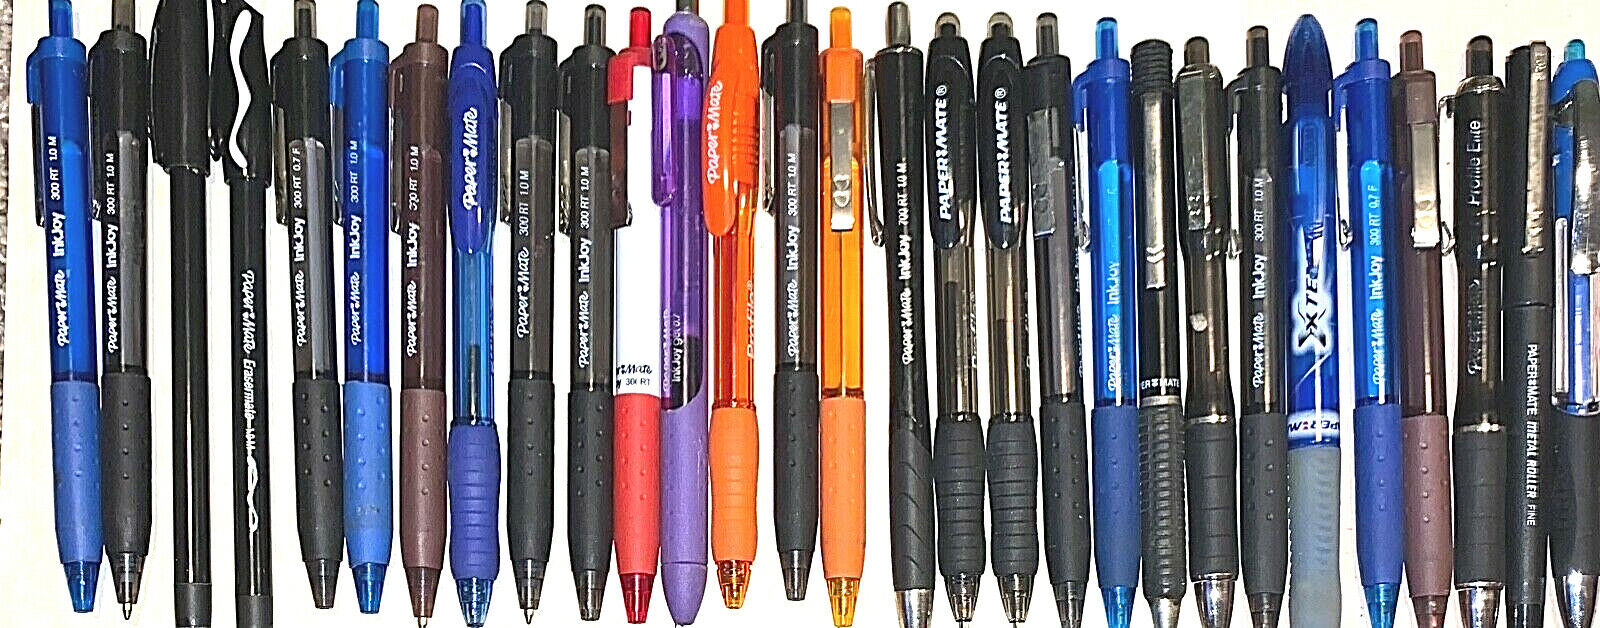 Collectibles,Pens,29,Ballpoint,Rollerball,Paper Mate,Mixed Lot,Ink Joy,Profile